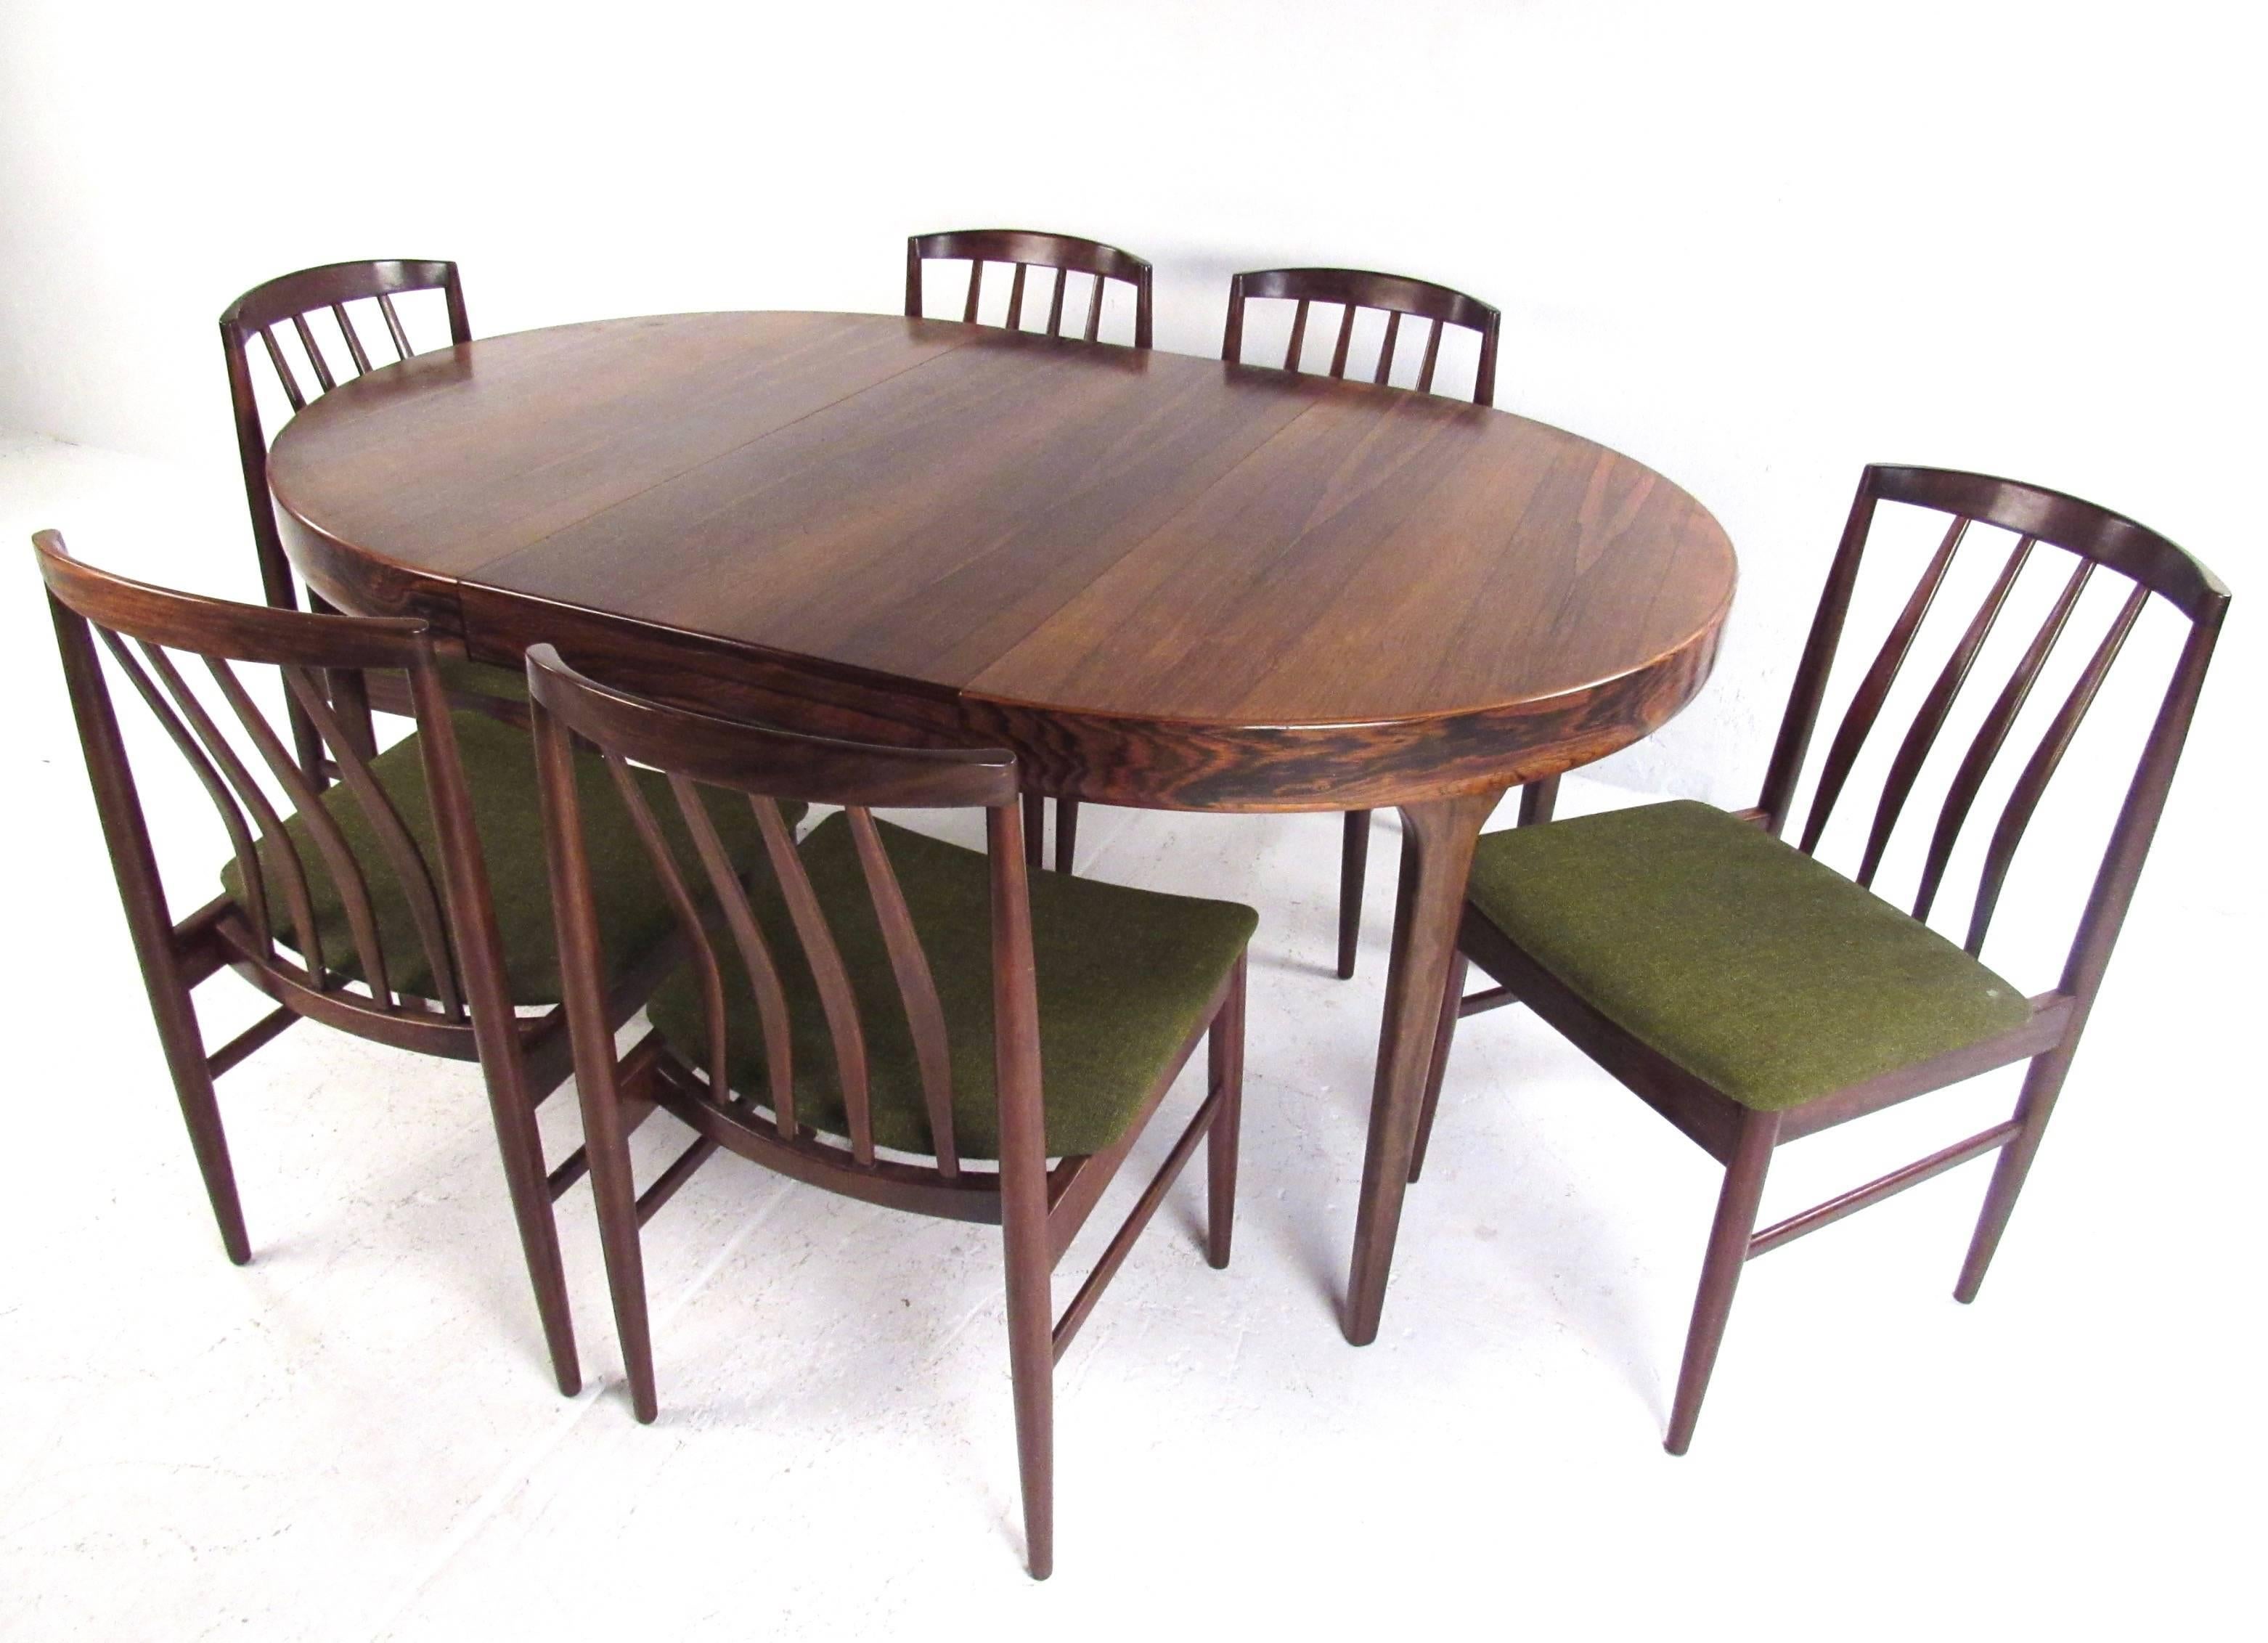 This stunning vintage Danish dining set features six sculpted rosewood chairs by Vamo Sonderborg and circular Ib Kofod-Larsen dining table. Table opens up from 43.5 inches in diameter to 102.75 inches wide with three leaves installed. The stunning